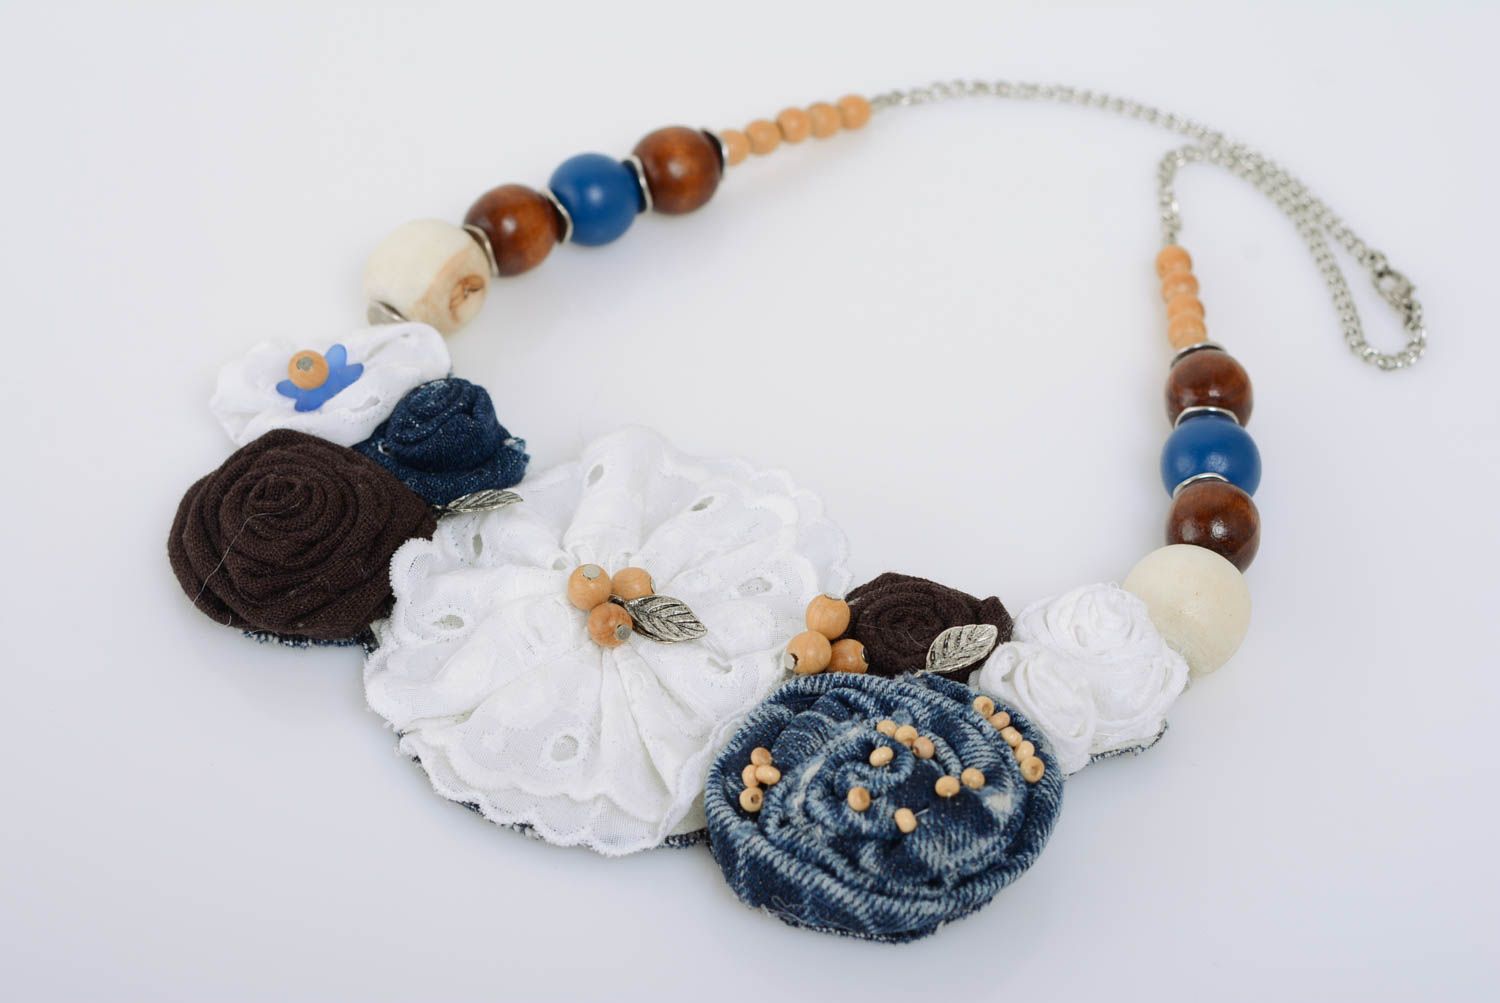 Handmade designer necklace on chain with fabric flowers and wooden beads photo 1